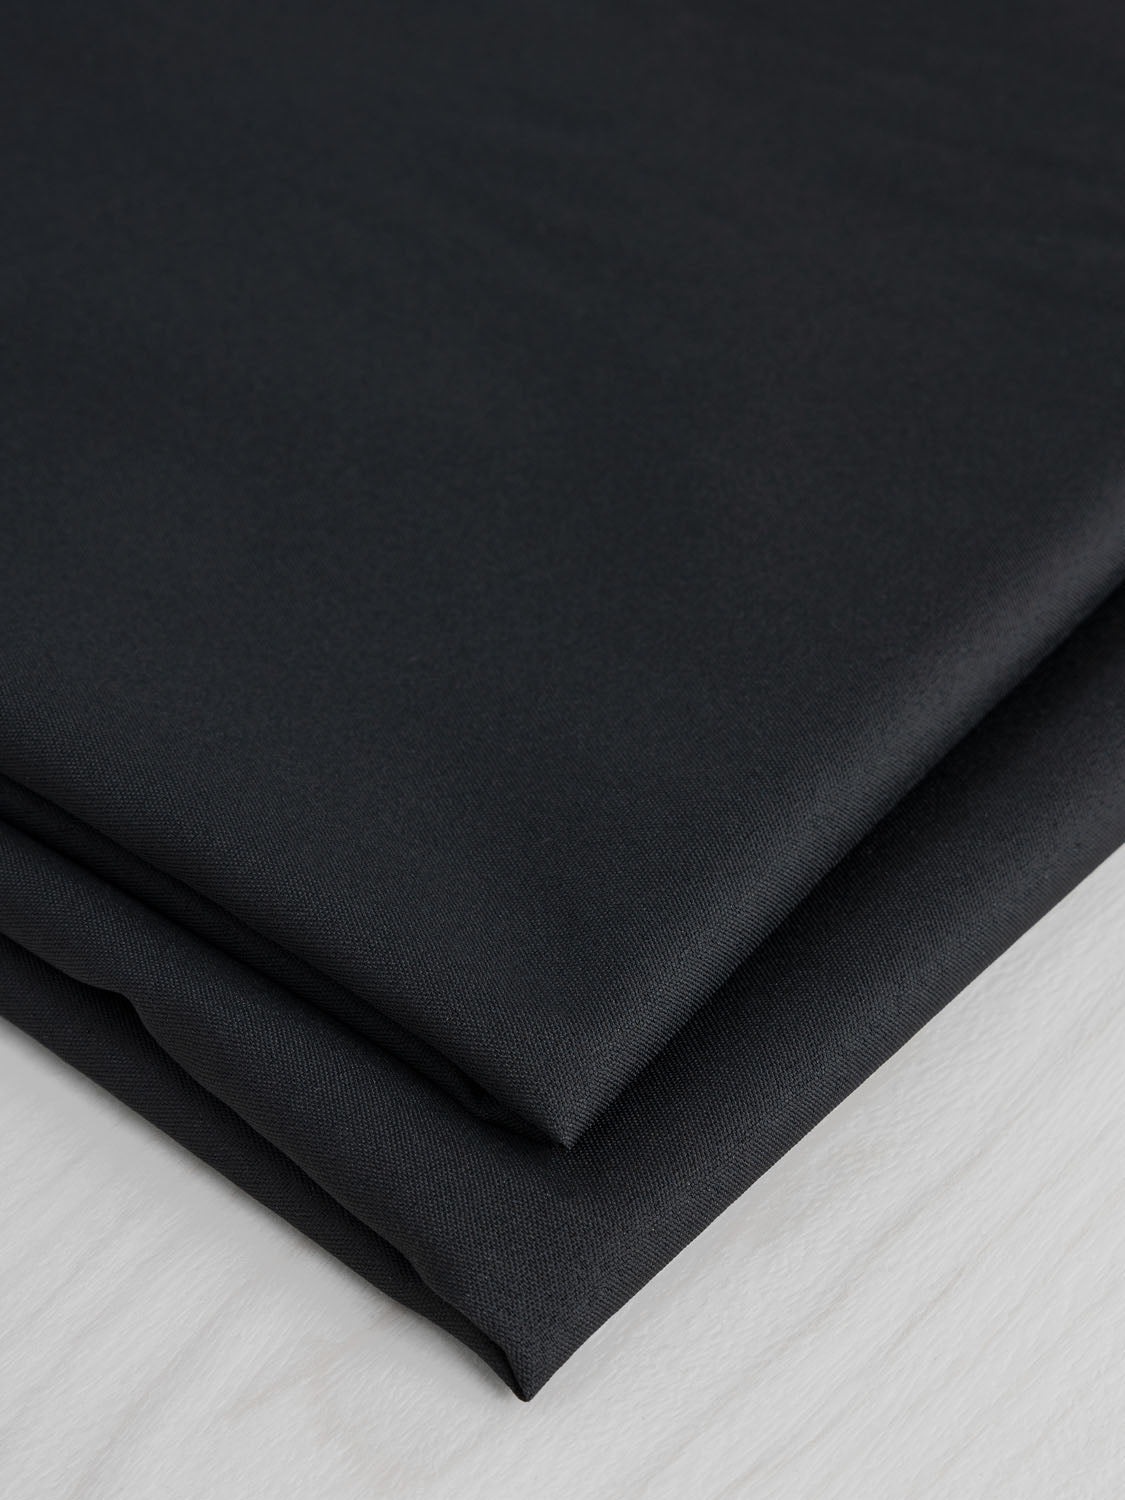 Midweight Core Collection Organic Cotton Canvas - Black